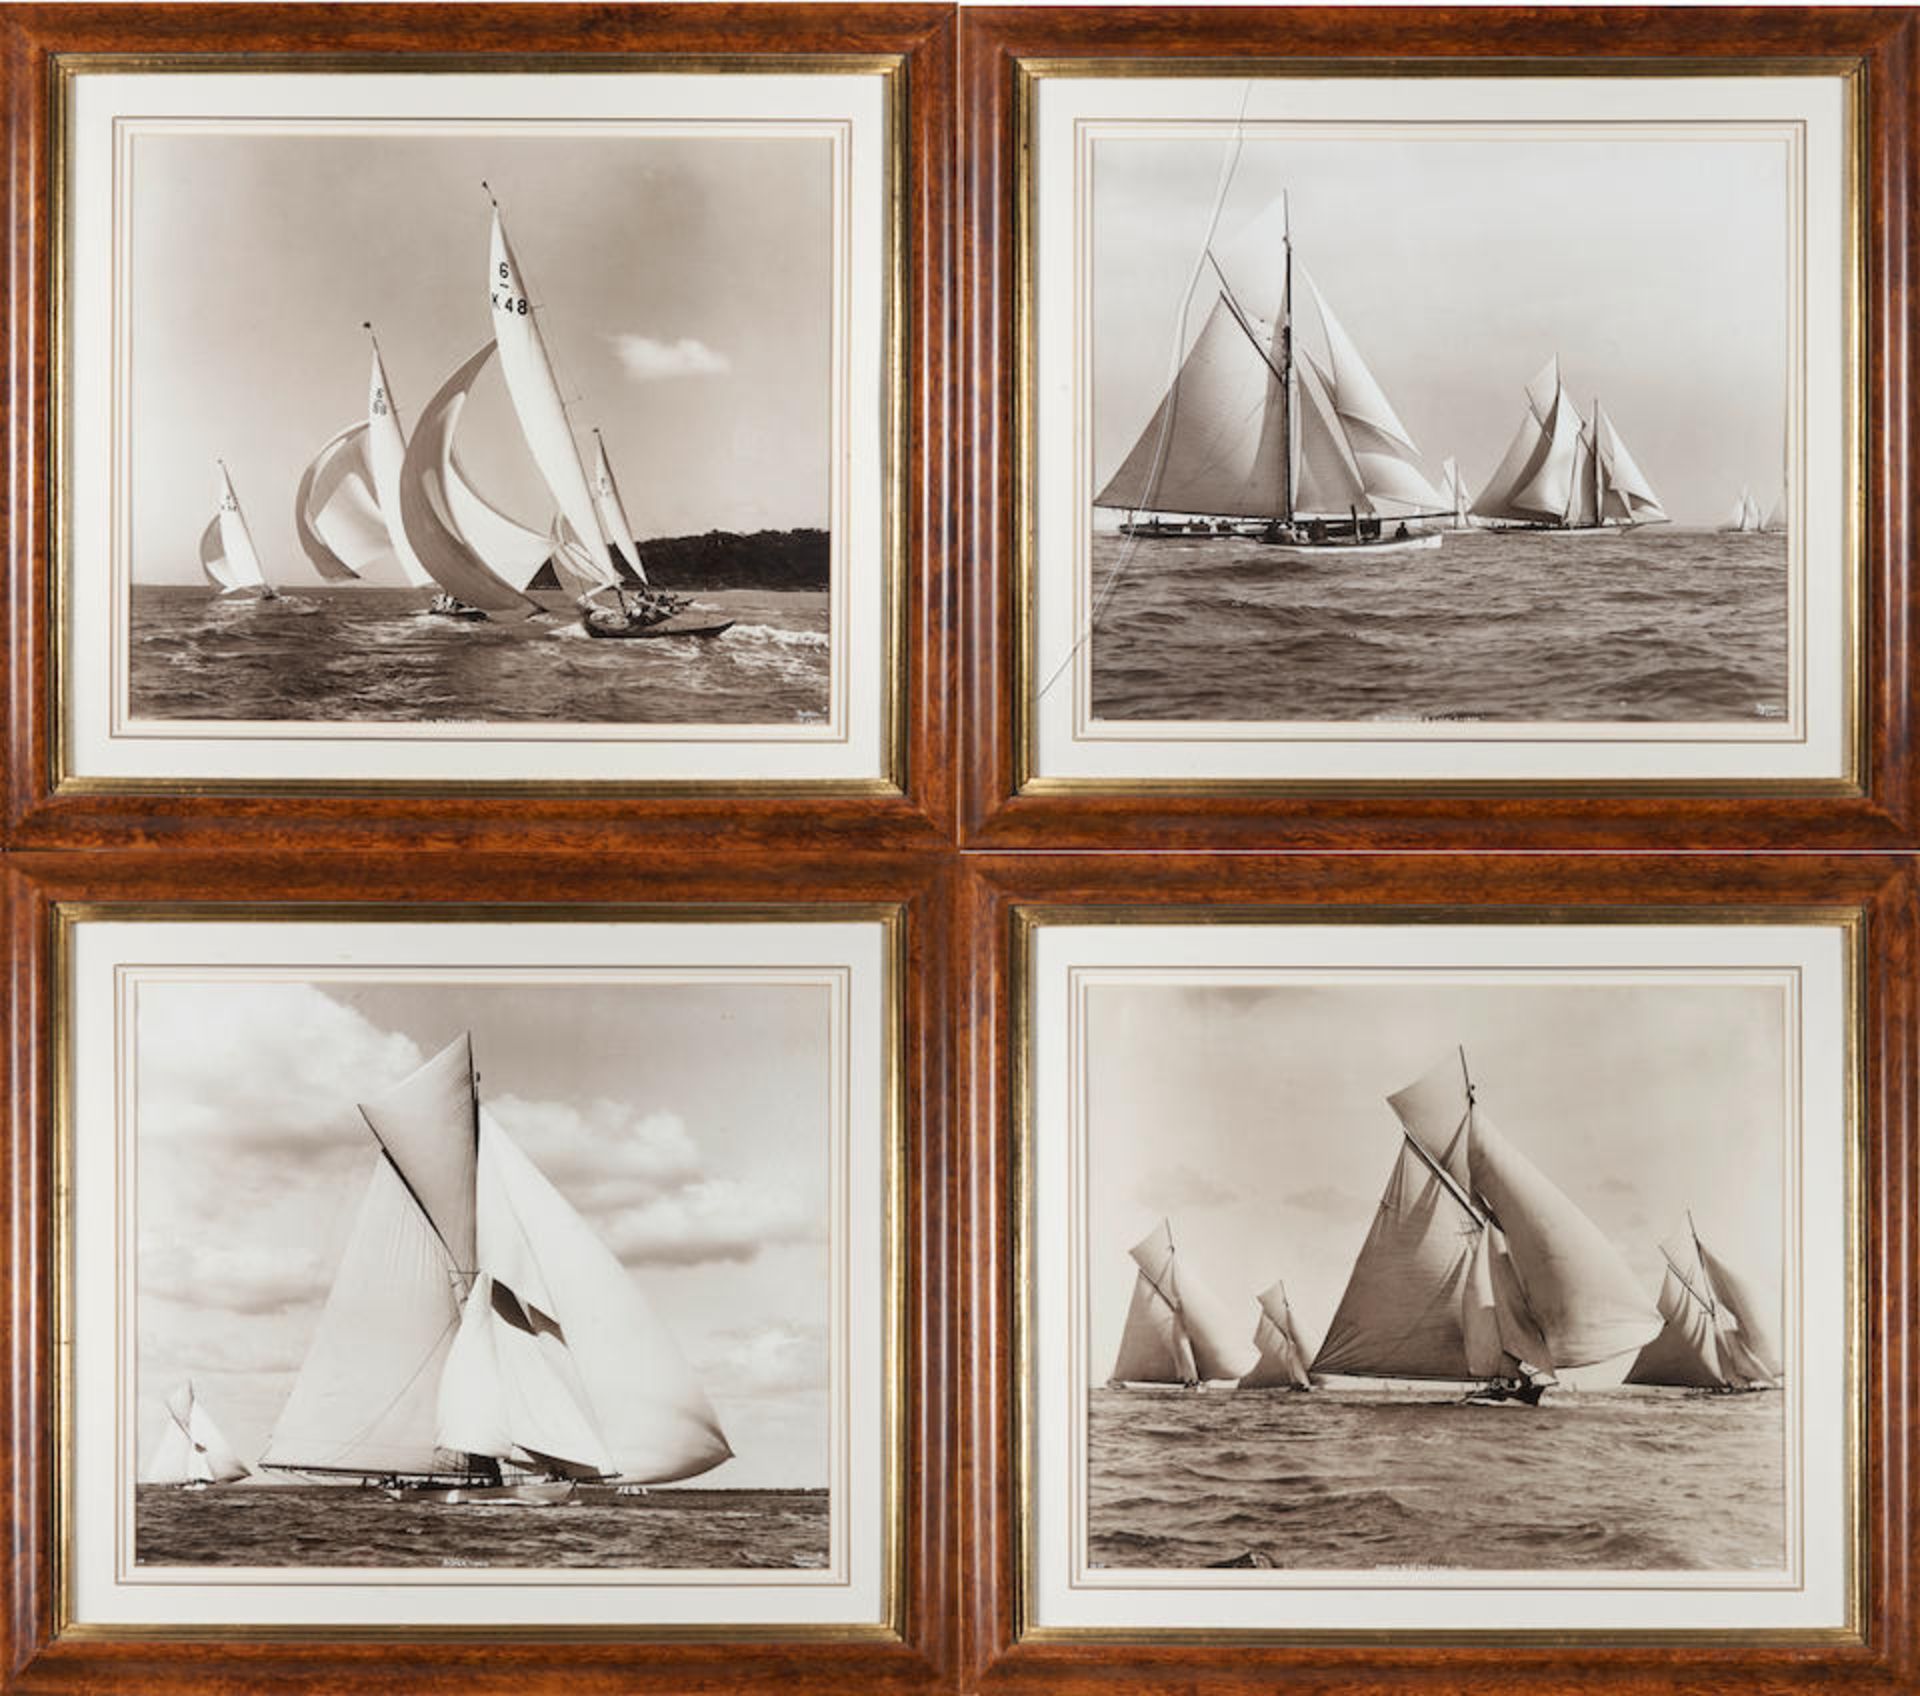 SIX FRAMED PHOTOGRAPHS OF RACING YACHTS